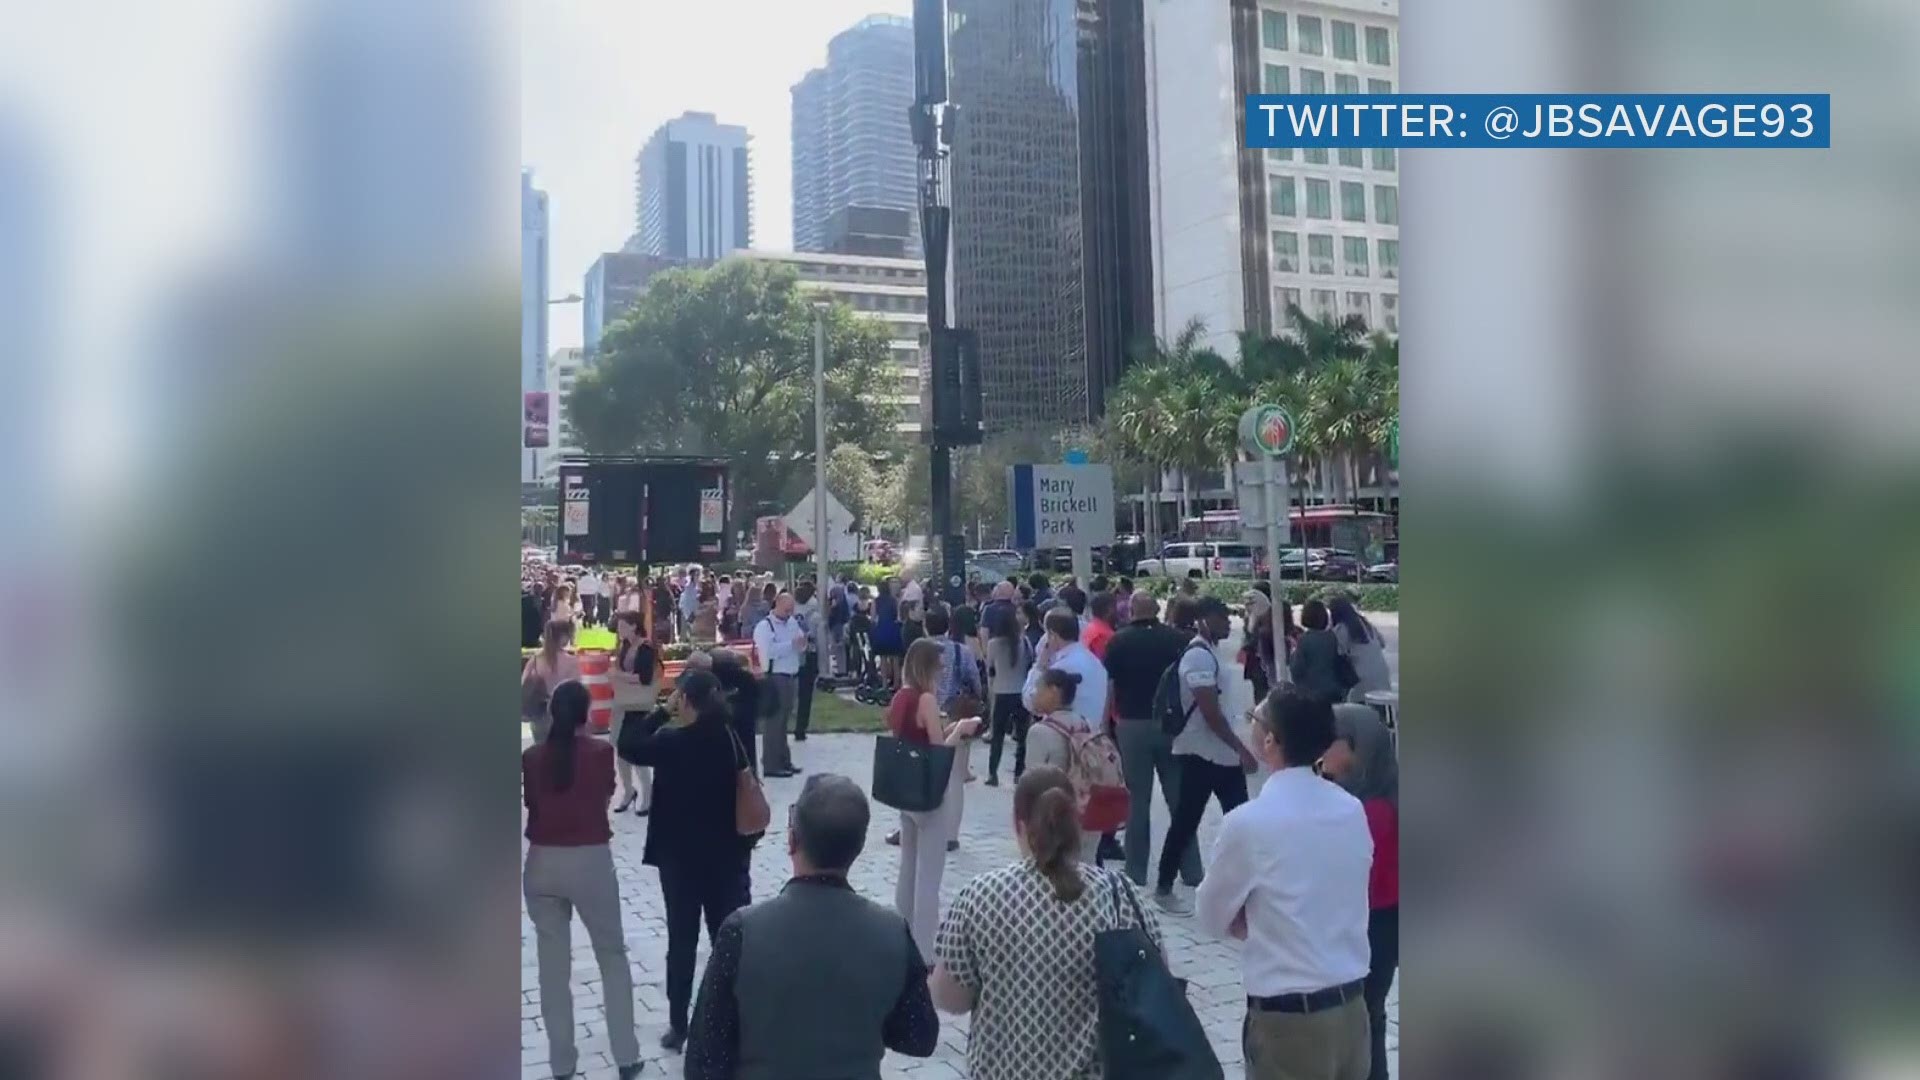 People in Miami gather outside after reports of buildings shaking following the 7.7 magnitude earthquake in the Caribbean Sea.